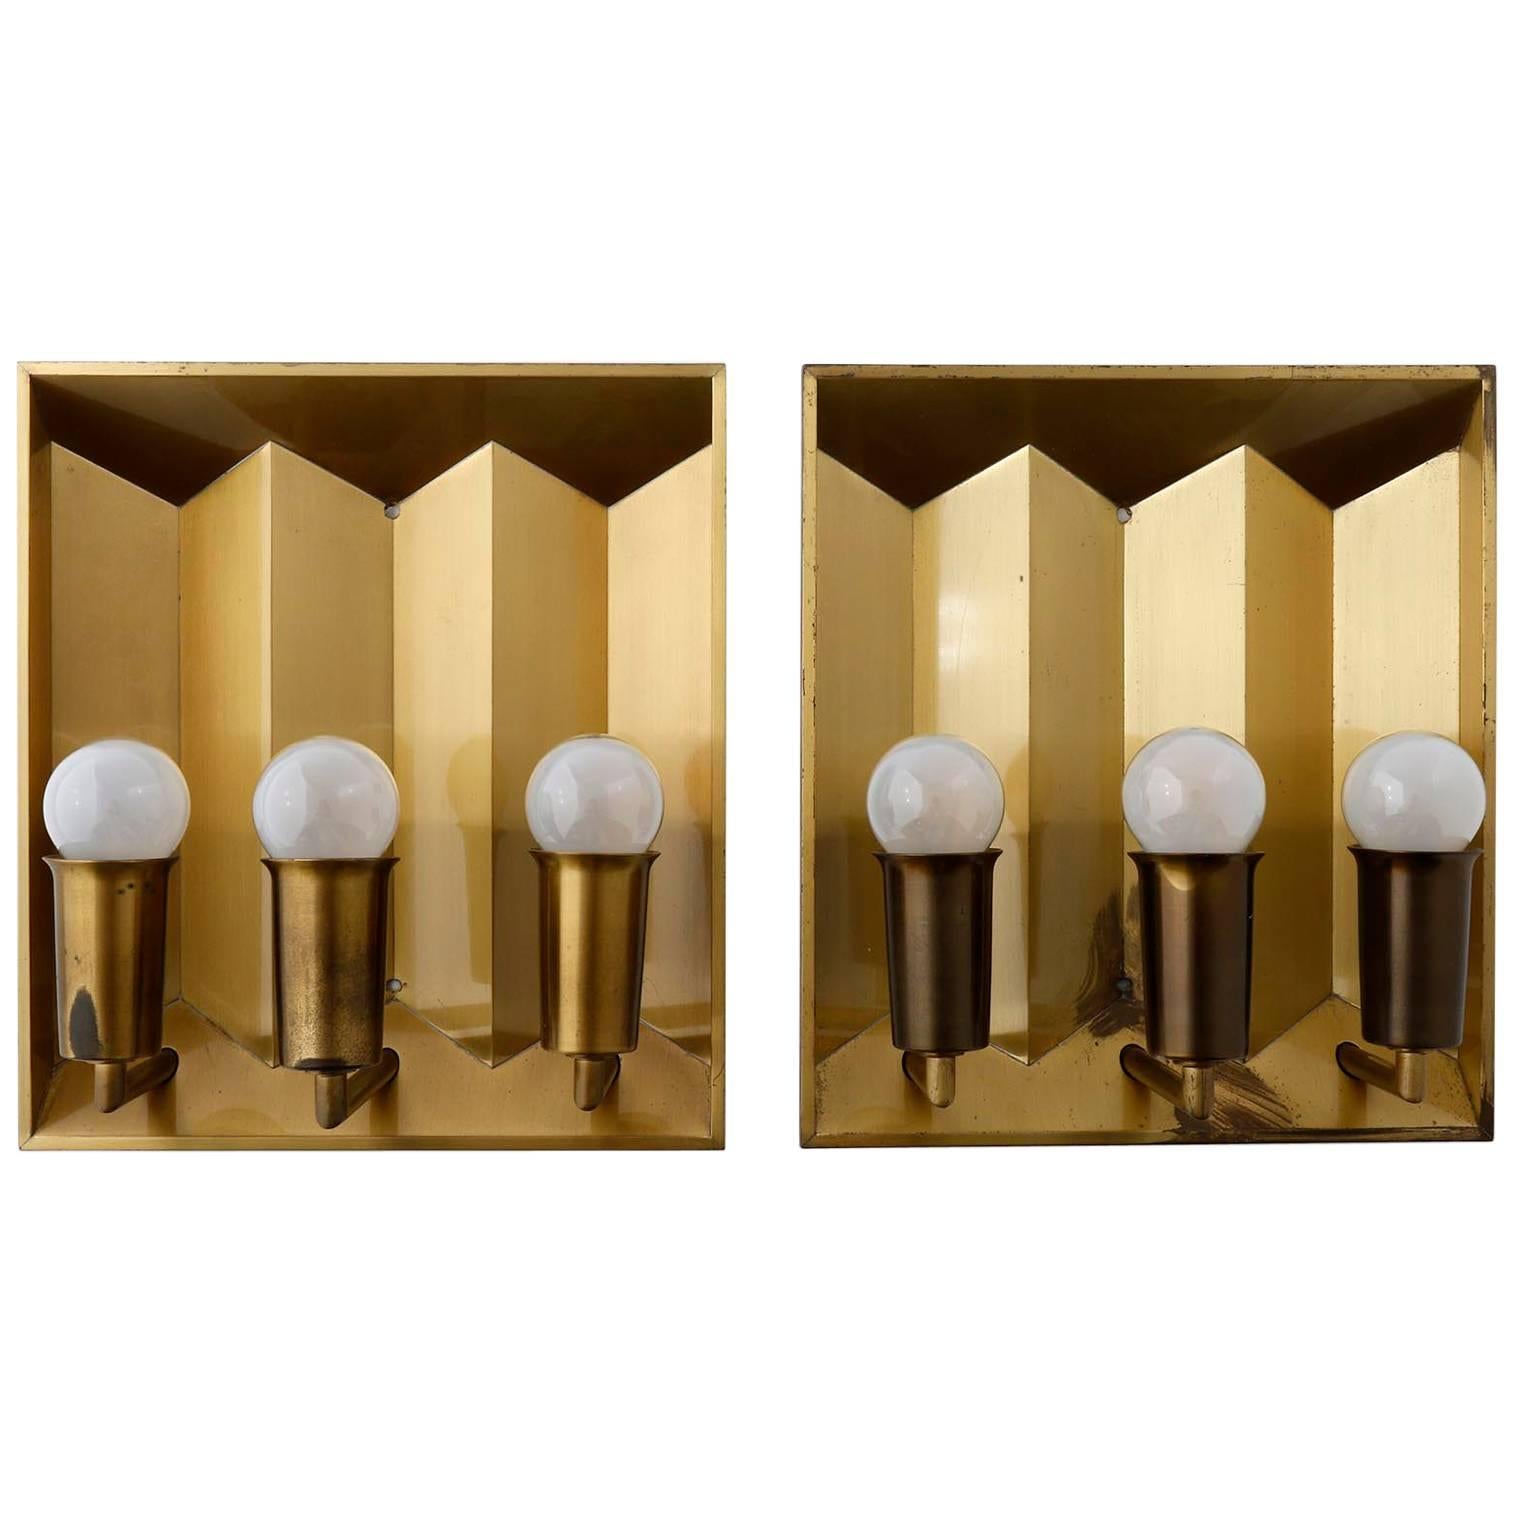 Pair of Brass Sconces Wall Lights by Fog & Morup, Denmark, 1960